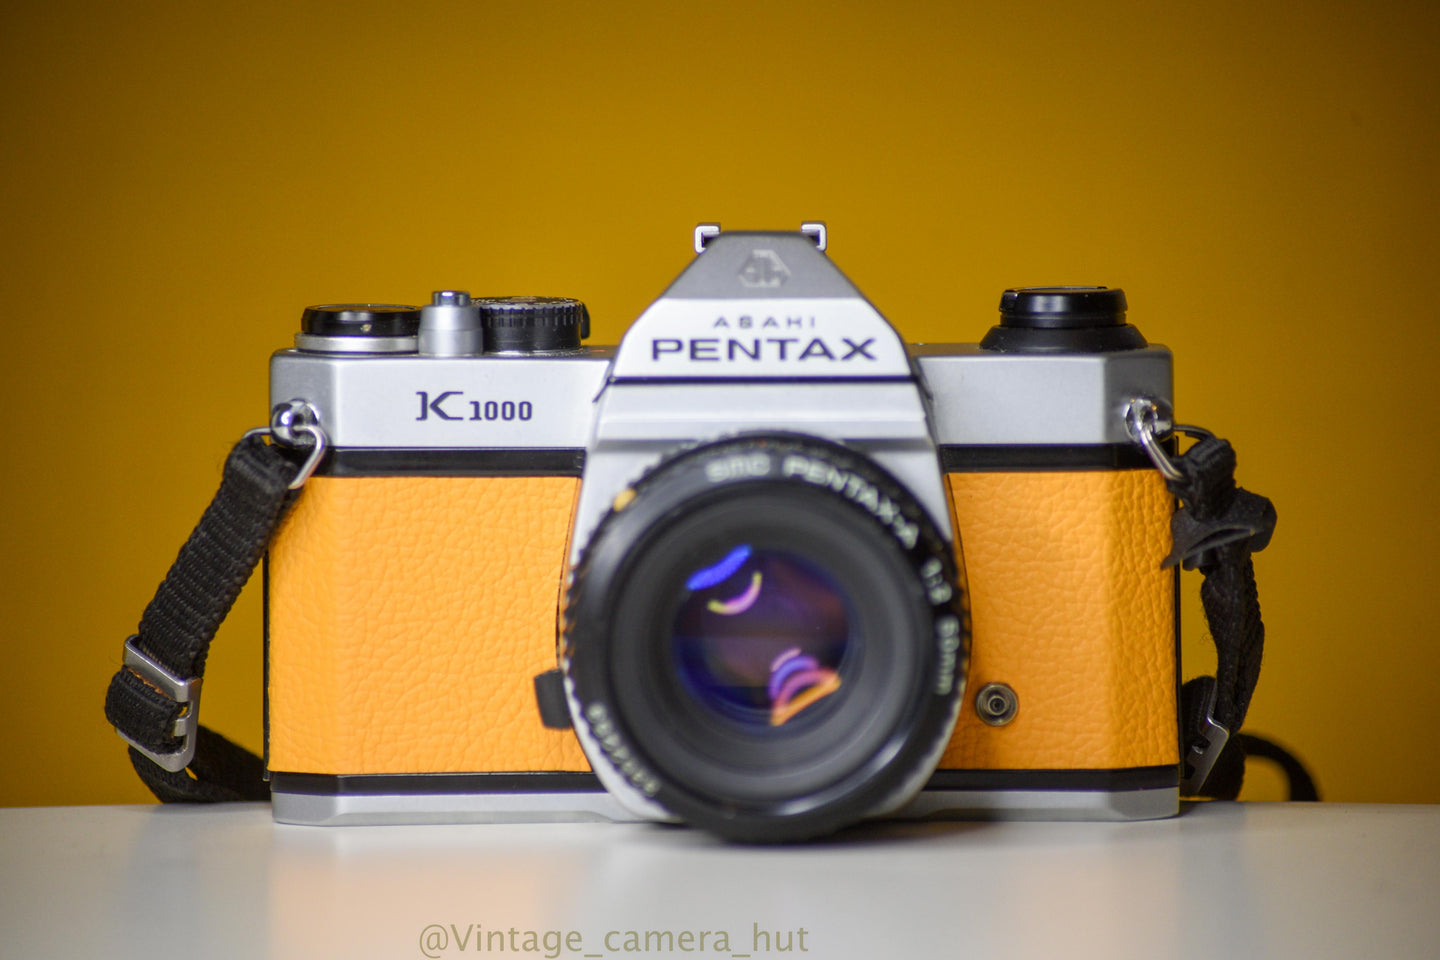 Pentax K1000 Film Camera with Pentax 50mm f/1.7 Lens in Yellow